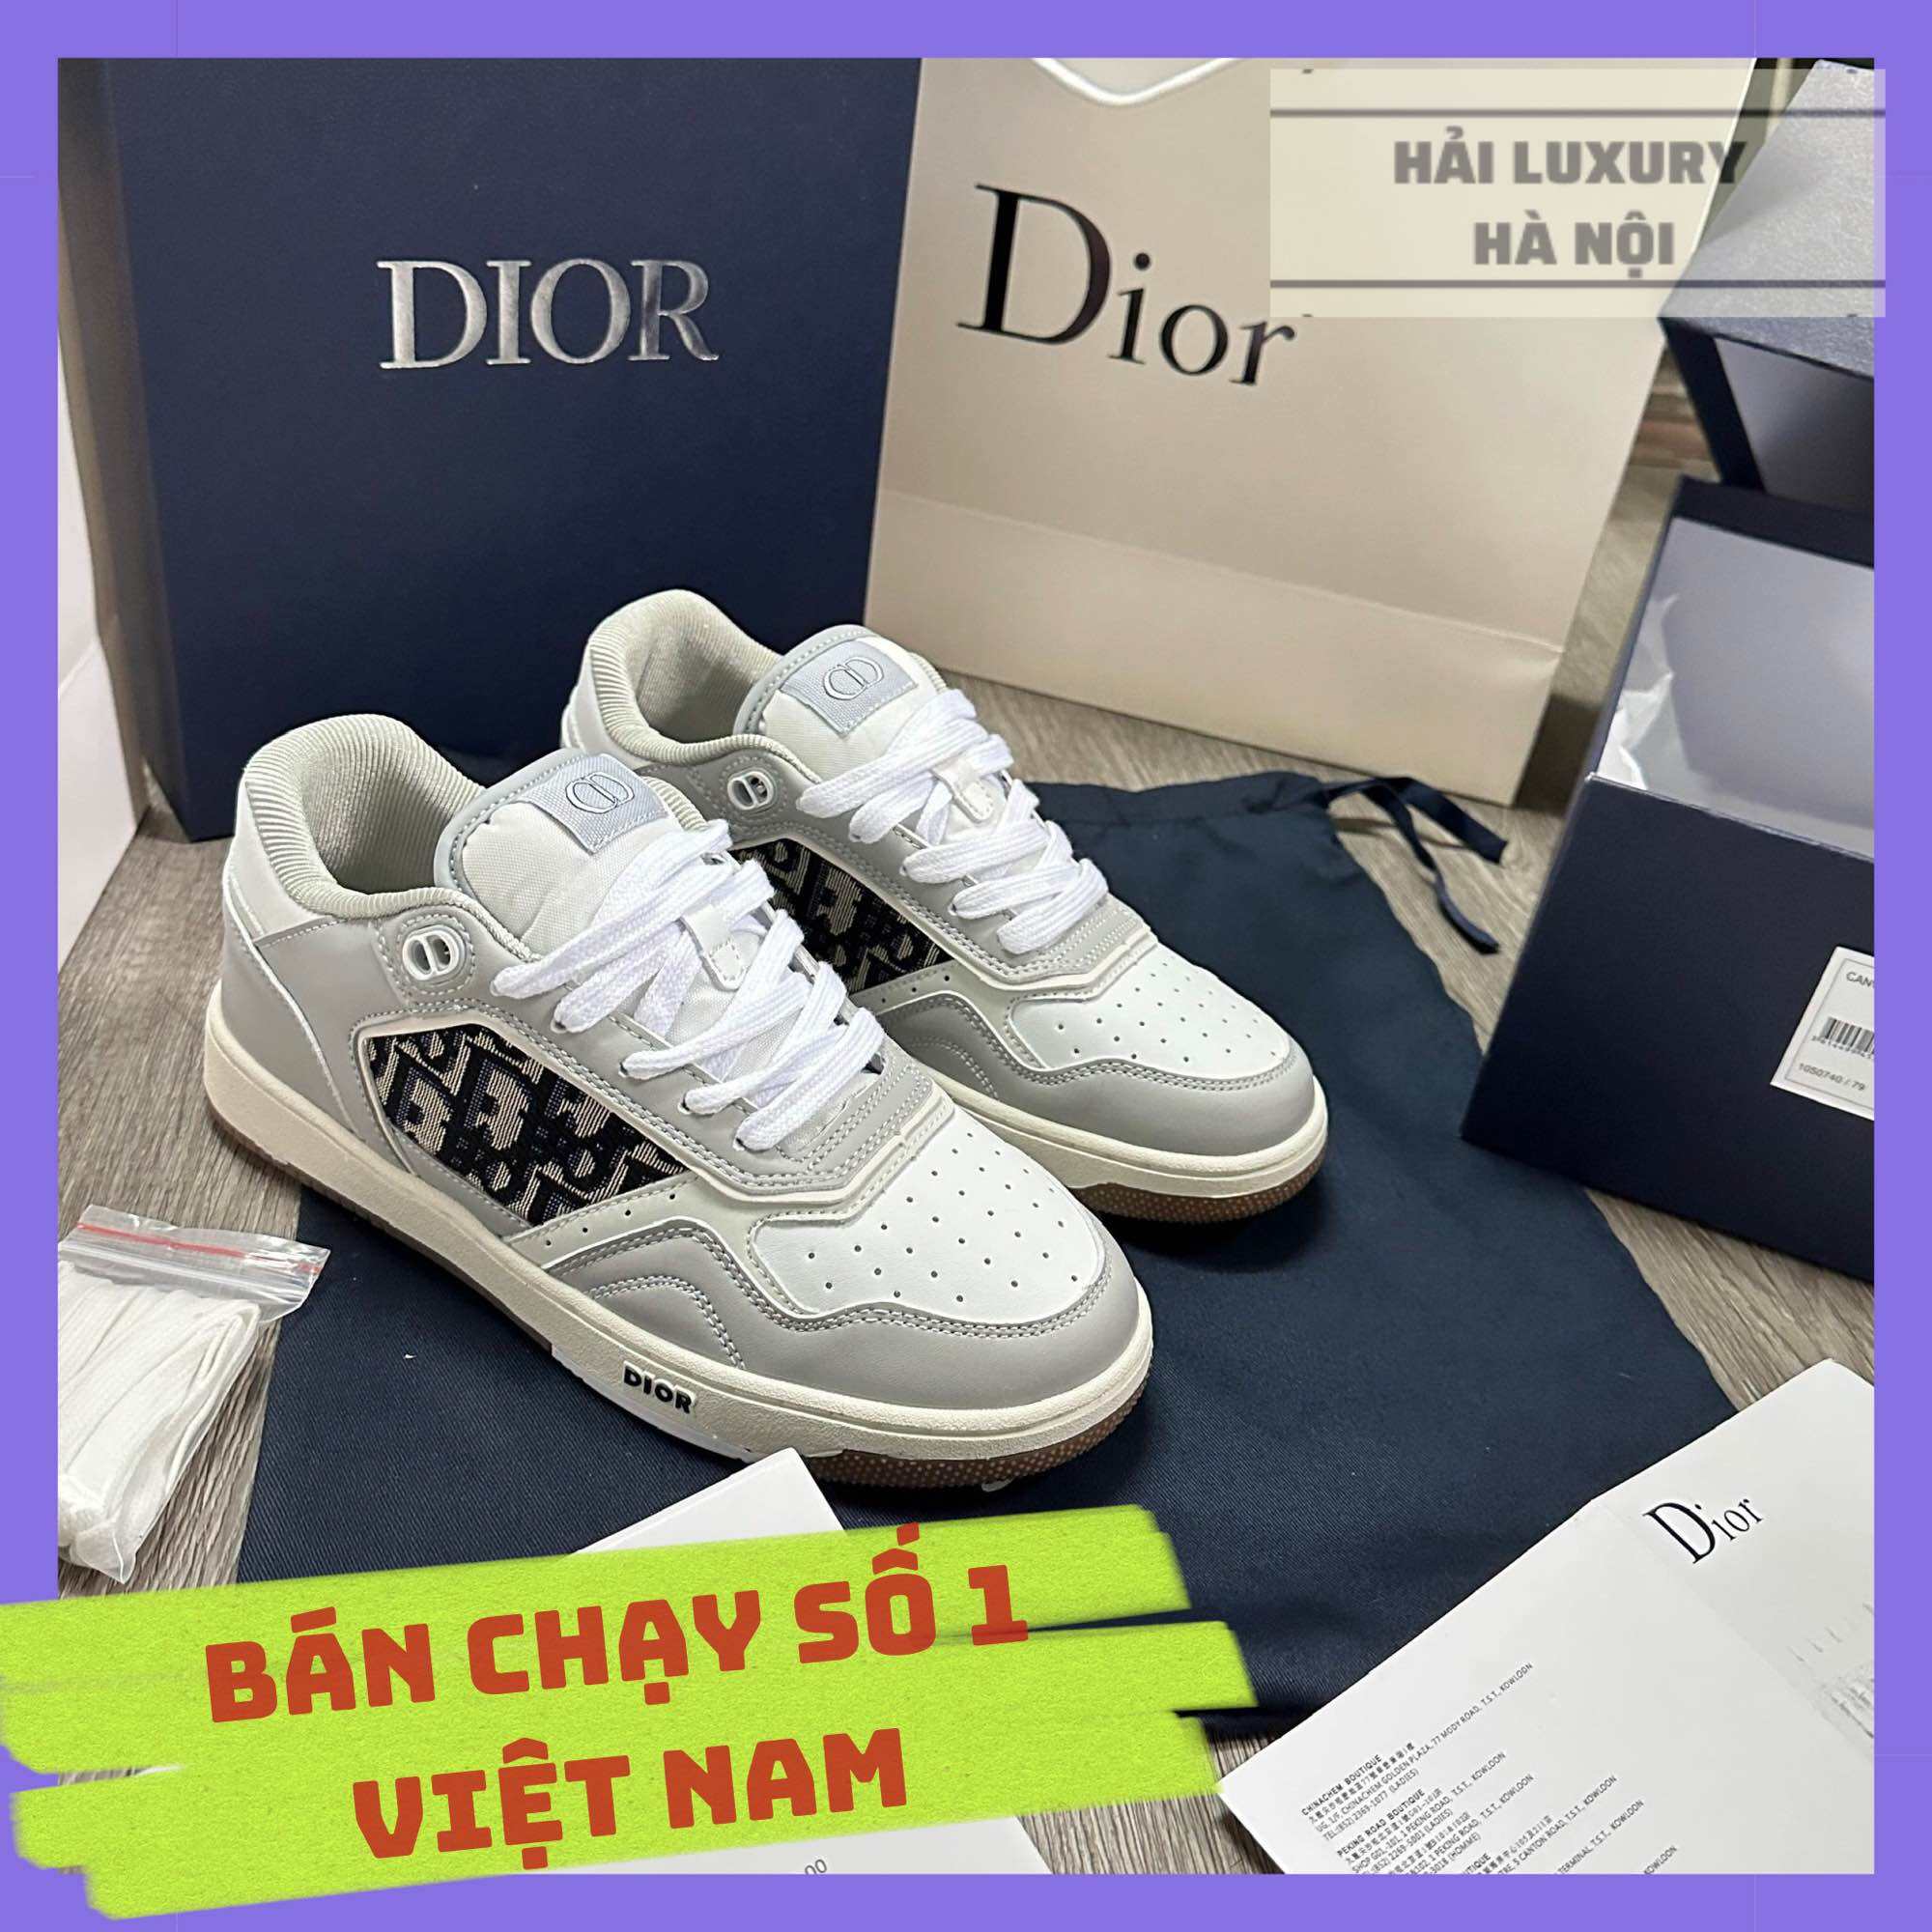 B27 LowTop Sneaker Olive and Cream Smooth Calfskin with Beige and Black  Dior Oblique Jacquard  DIOR SE